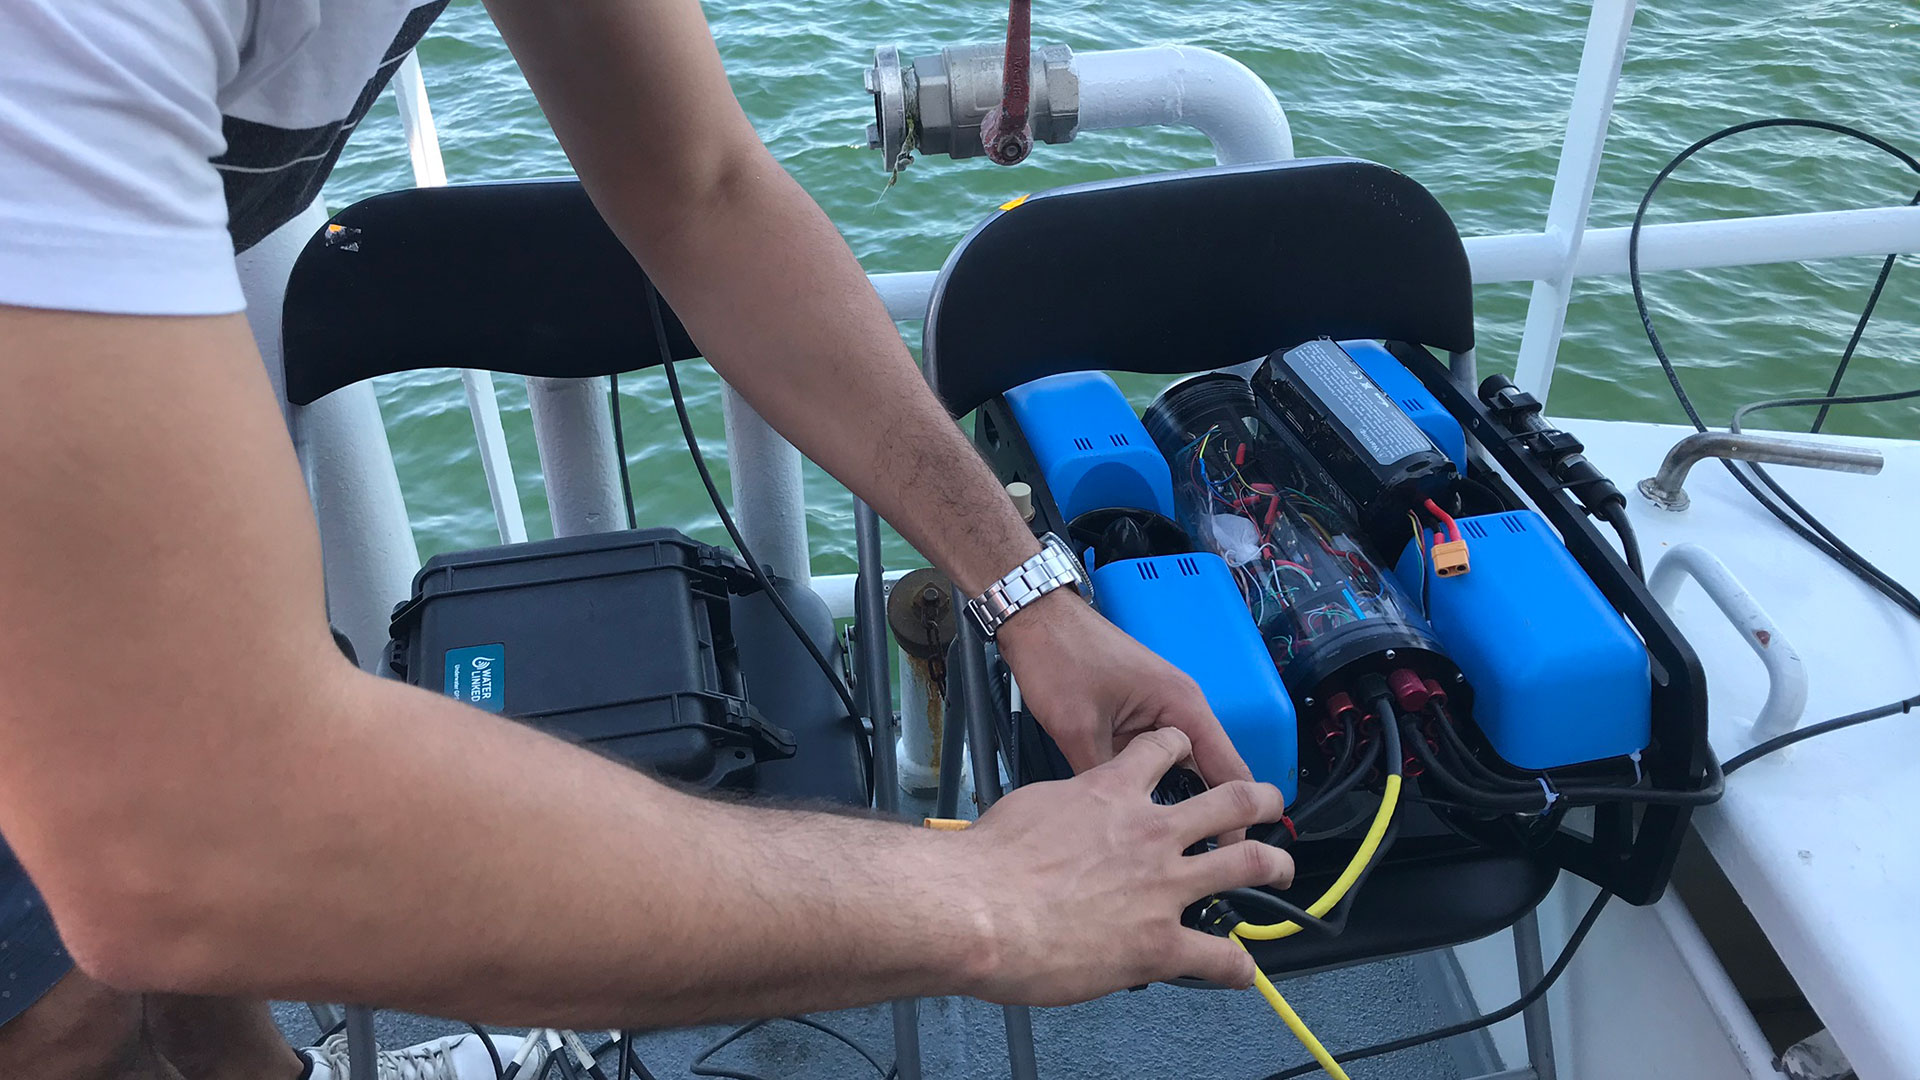 Deploying remotely operated underwater vehicle